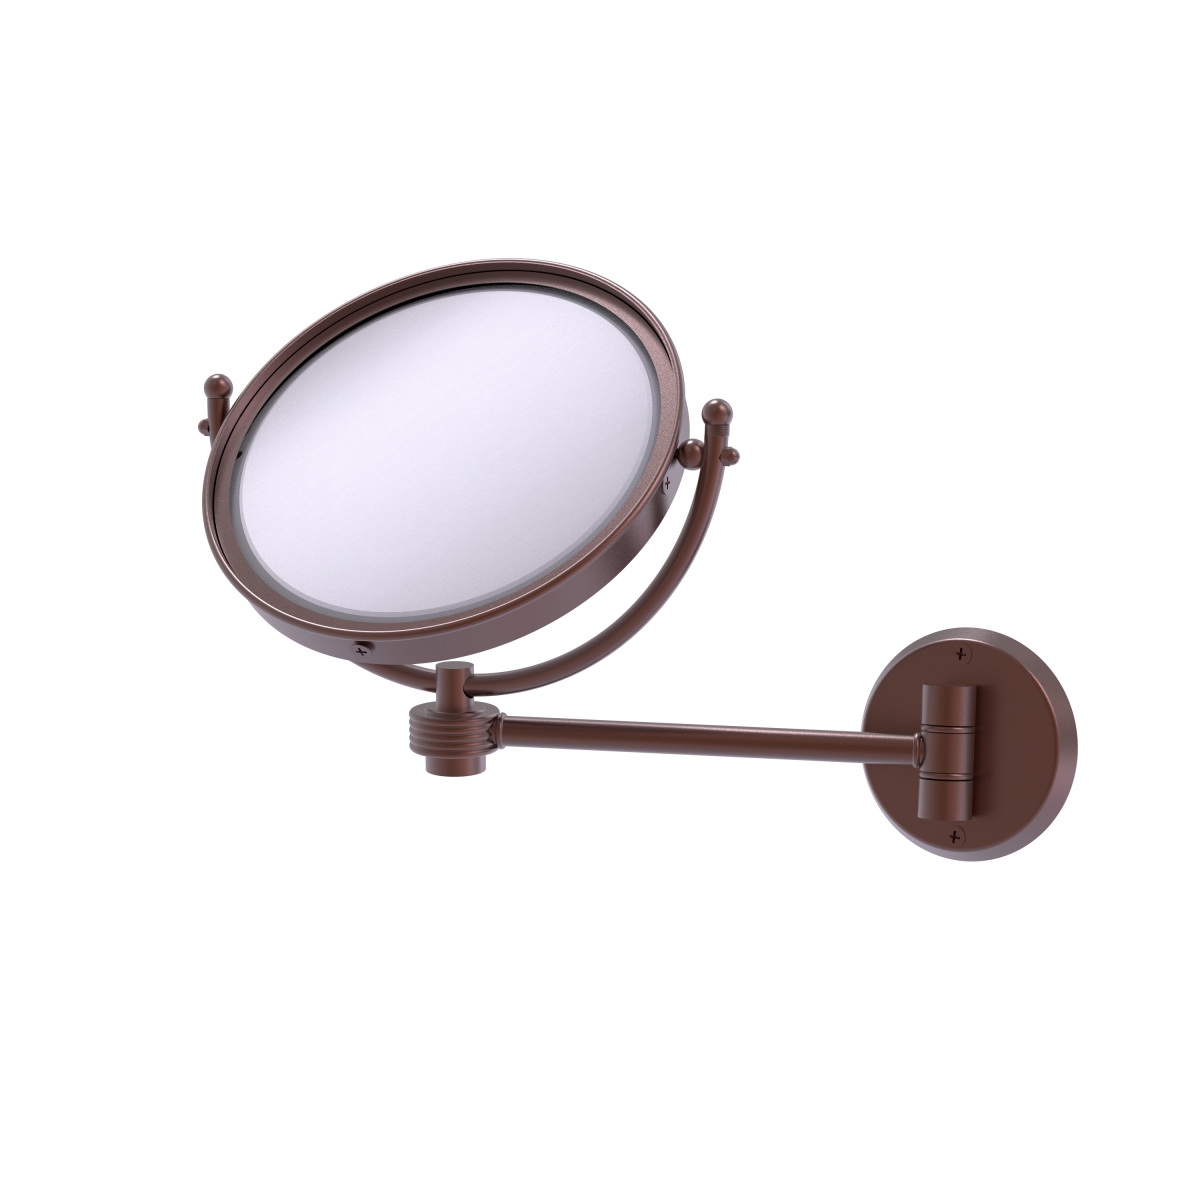 WM-5G-2X-CA 8 in. Wall Mounted Make-Up Mirror 2X Magnification, Antique Copper - 10 x 8 x 11 in -  Allied Brass, WM-5G/2X-CA